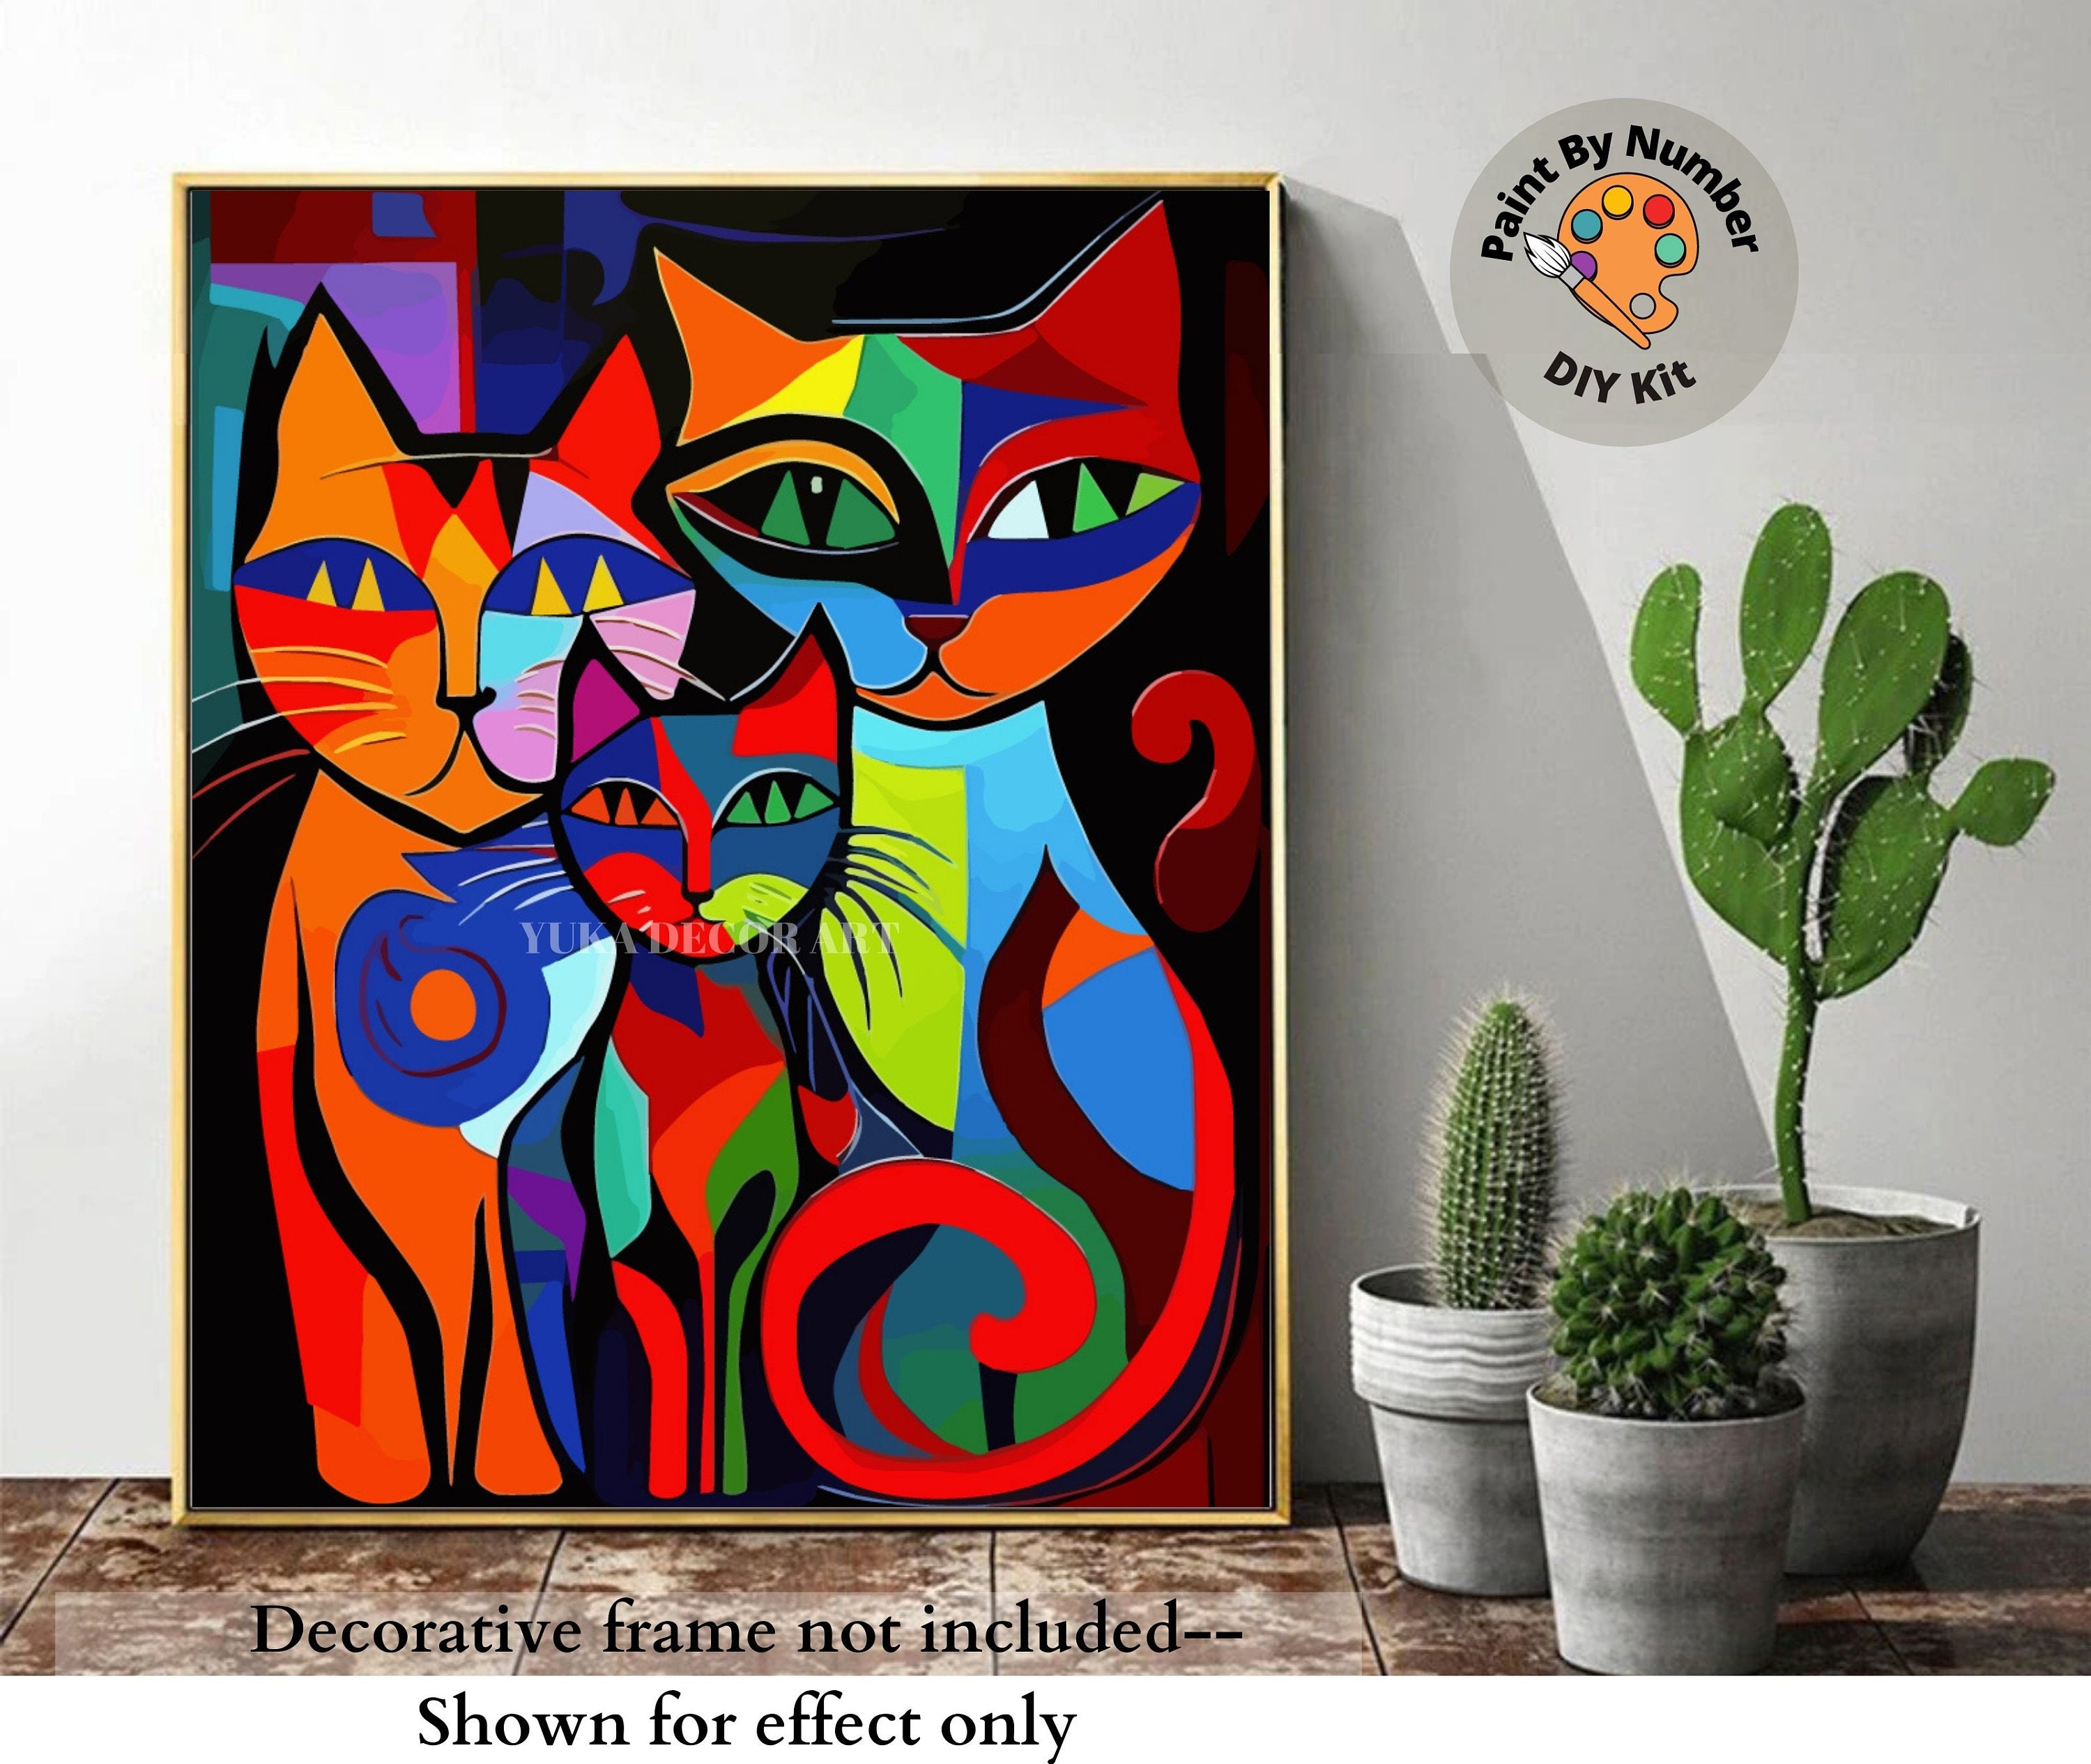 Paint By Numbers Adults kids Glass Cat Animal DIY Painting Kit 40x50CM  Canvas